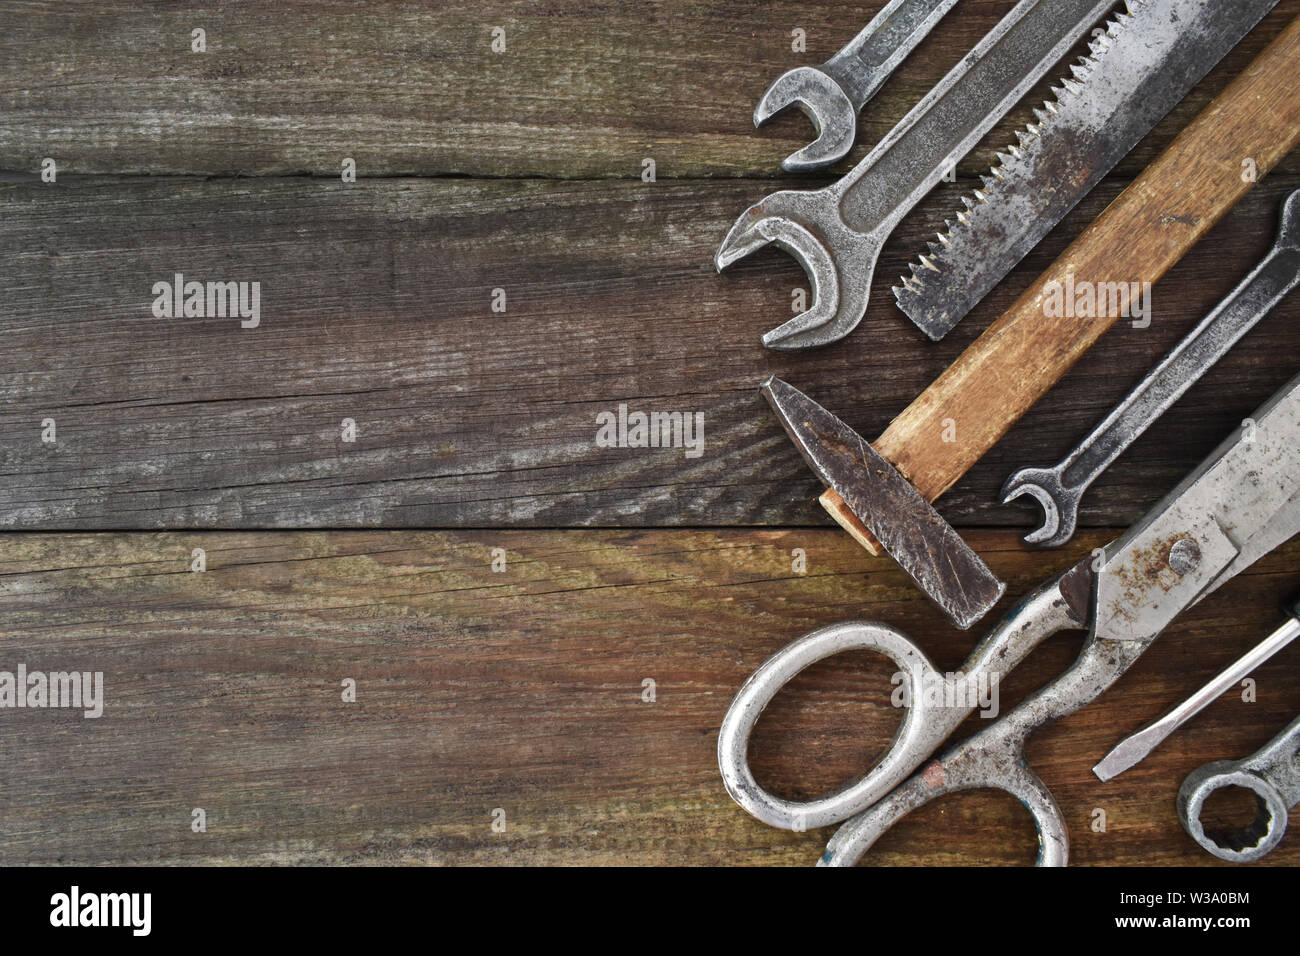 Retro vintage woodwork equipment set. Hammer scissors screwdriver on brown texture wooden planks background. Old carpentry rusty tools handy craft Stock Photo